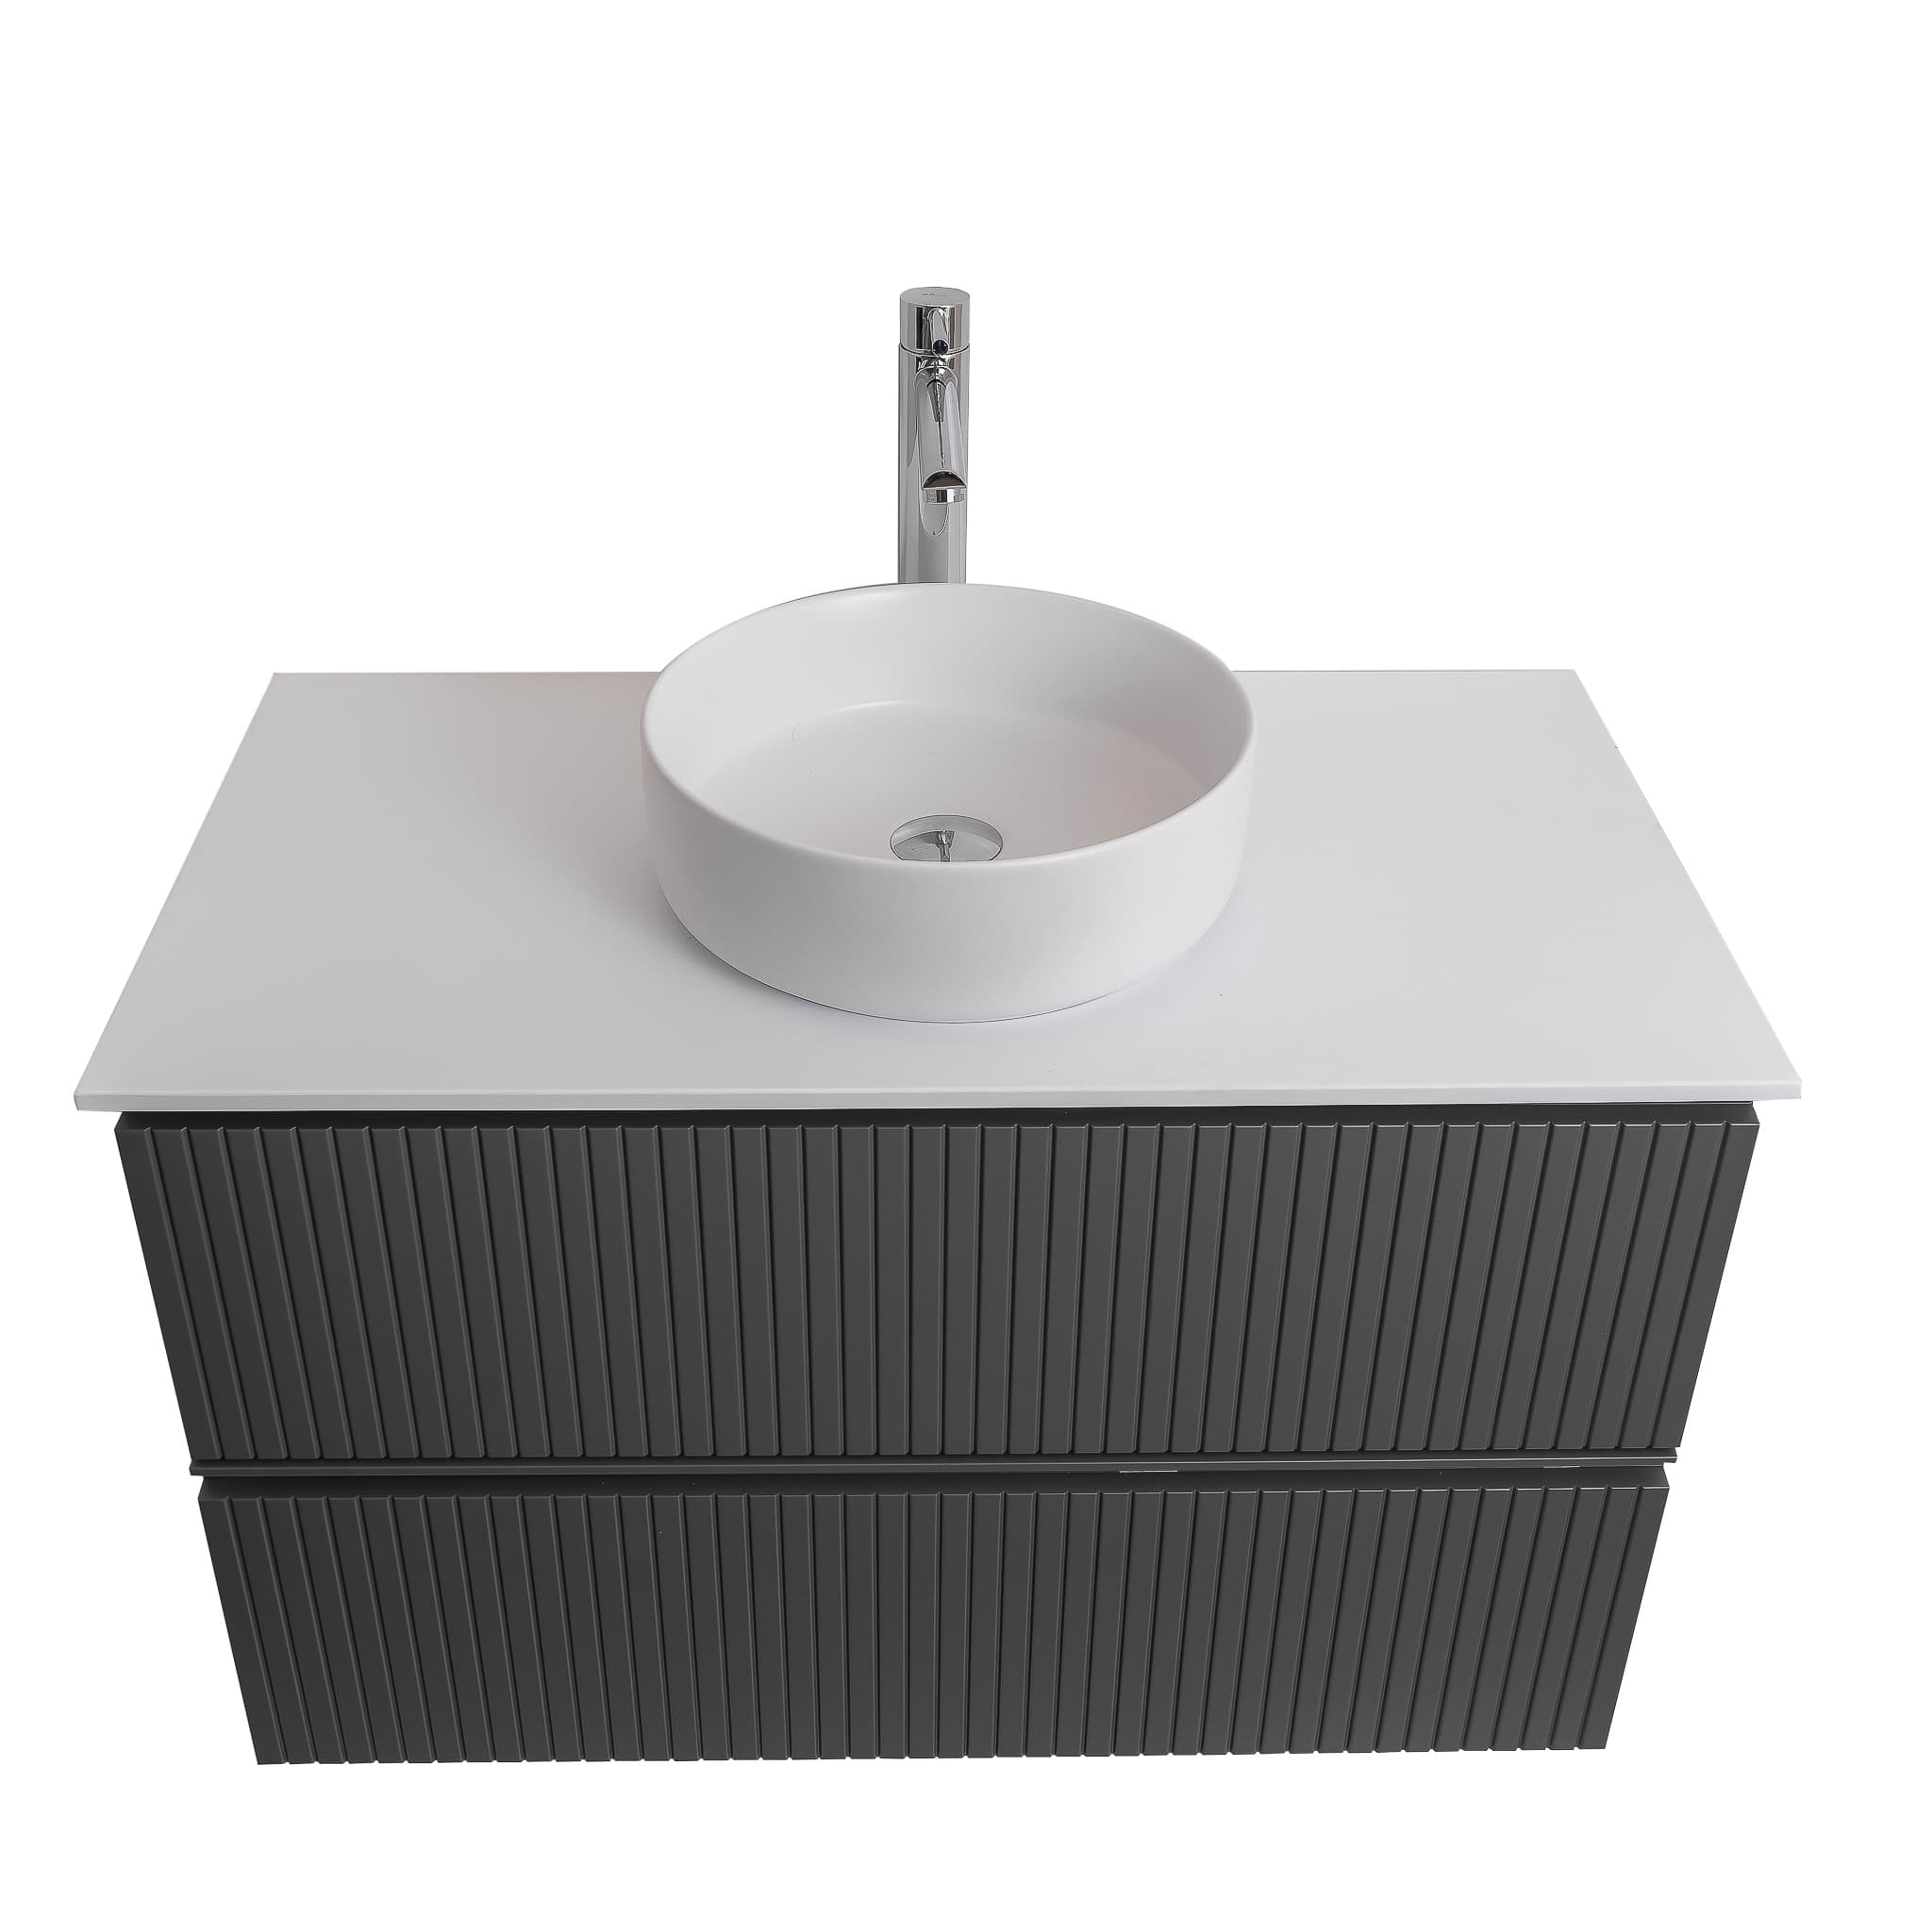 Ares 39.5 Matte Grey Cabinet, Ares White Top And Ares White Ceramic Basin, Wall Mounted Modern Vanity Set